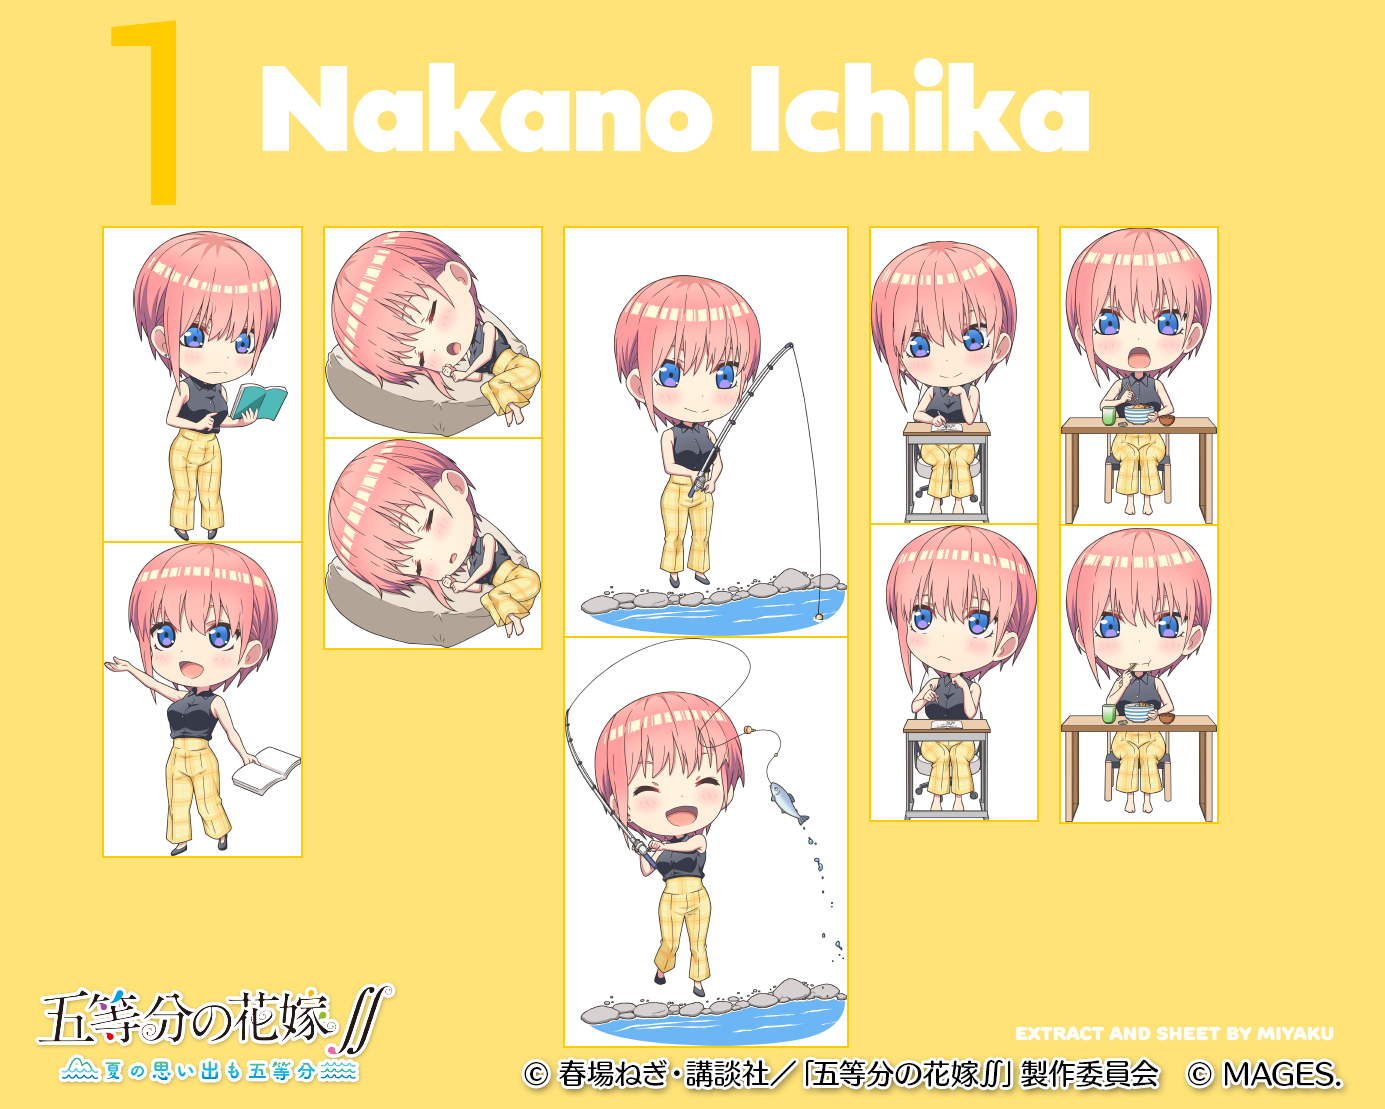 The Quintessential Quintuplets ∬: Summer Memories Also Come in Five - Ichika Nakano (Chibi)